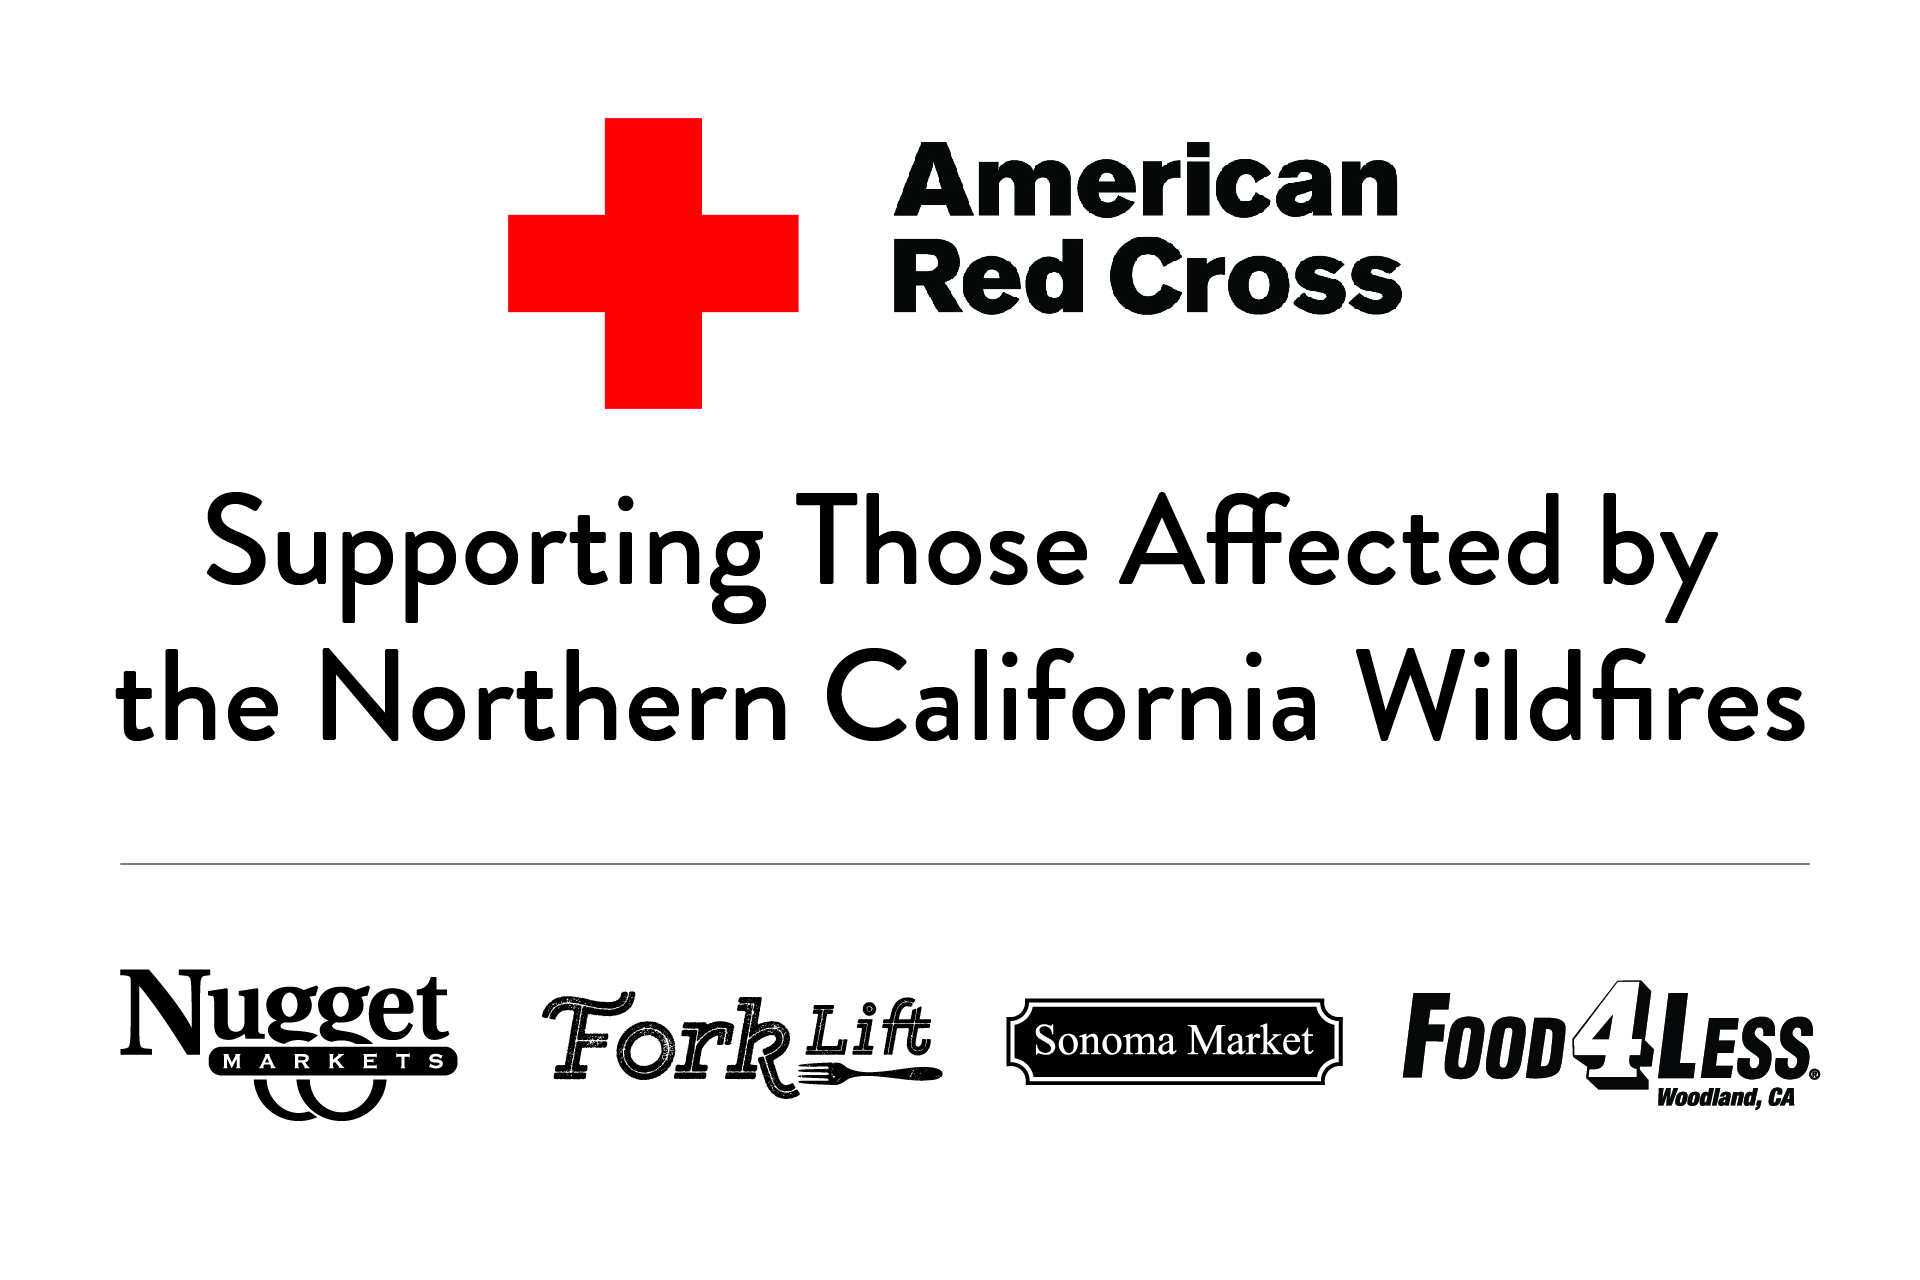 American Red Cross and all nugget logos with text: supporting those affect by the Northern California wildfires